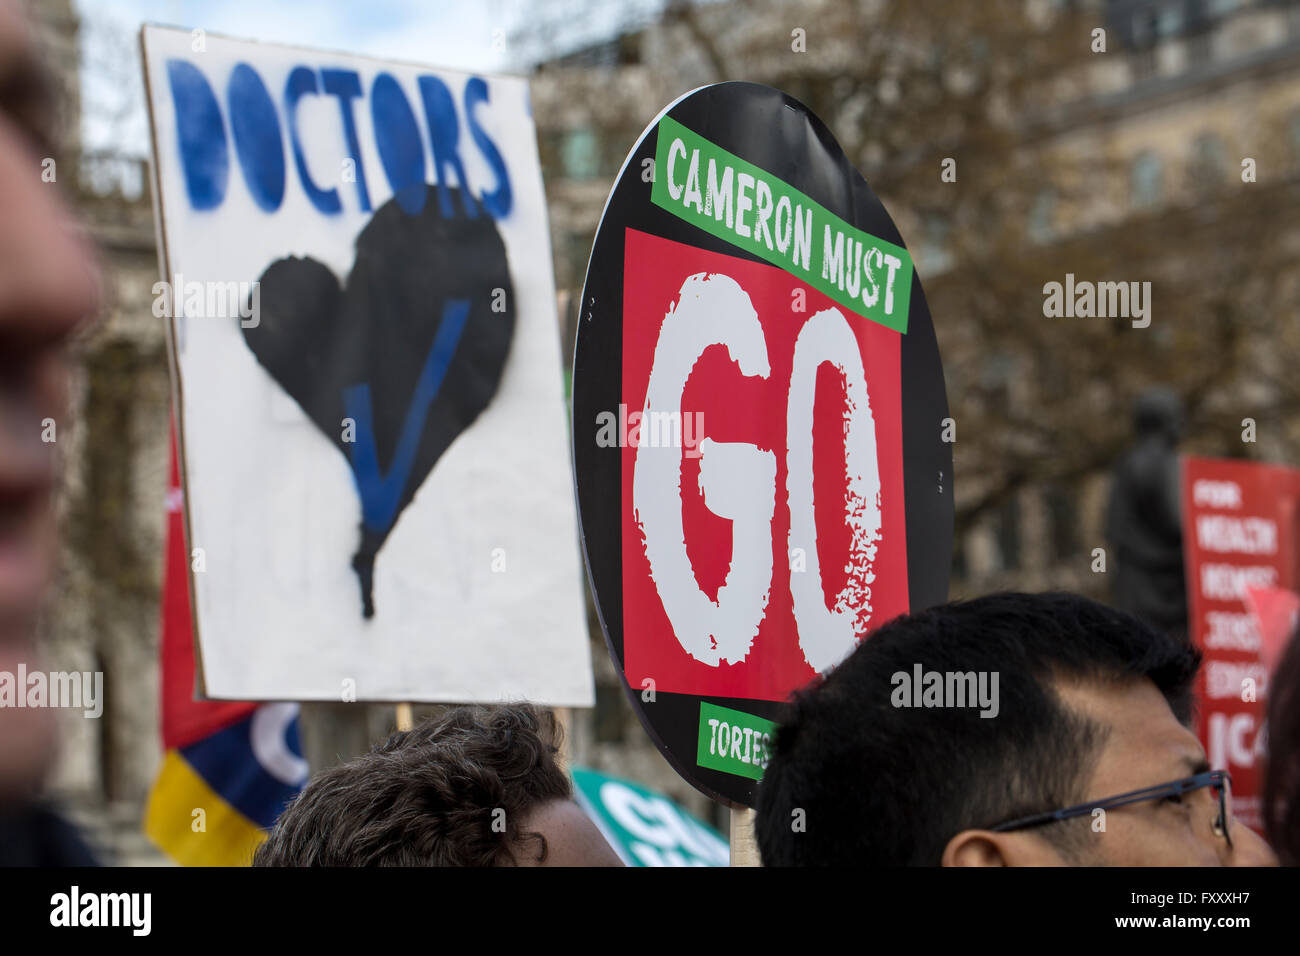 An anti government march in London against government austerity measures drew people from all walks of life. Stock Photo